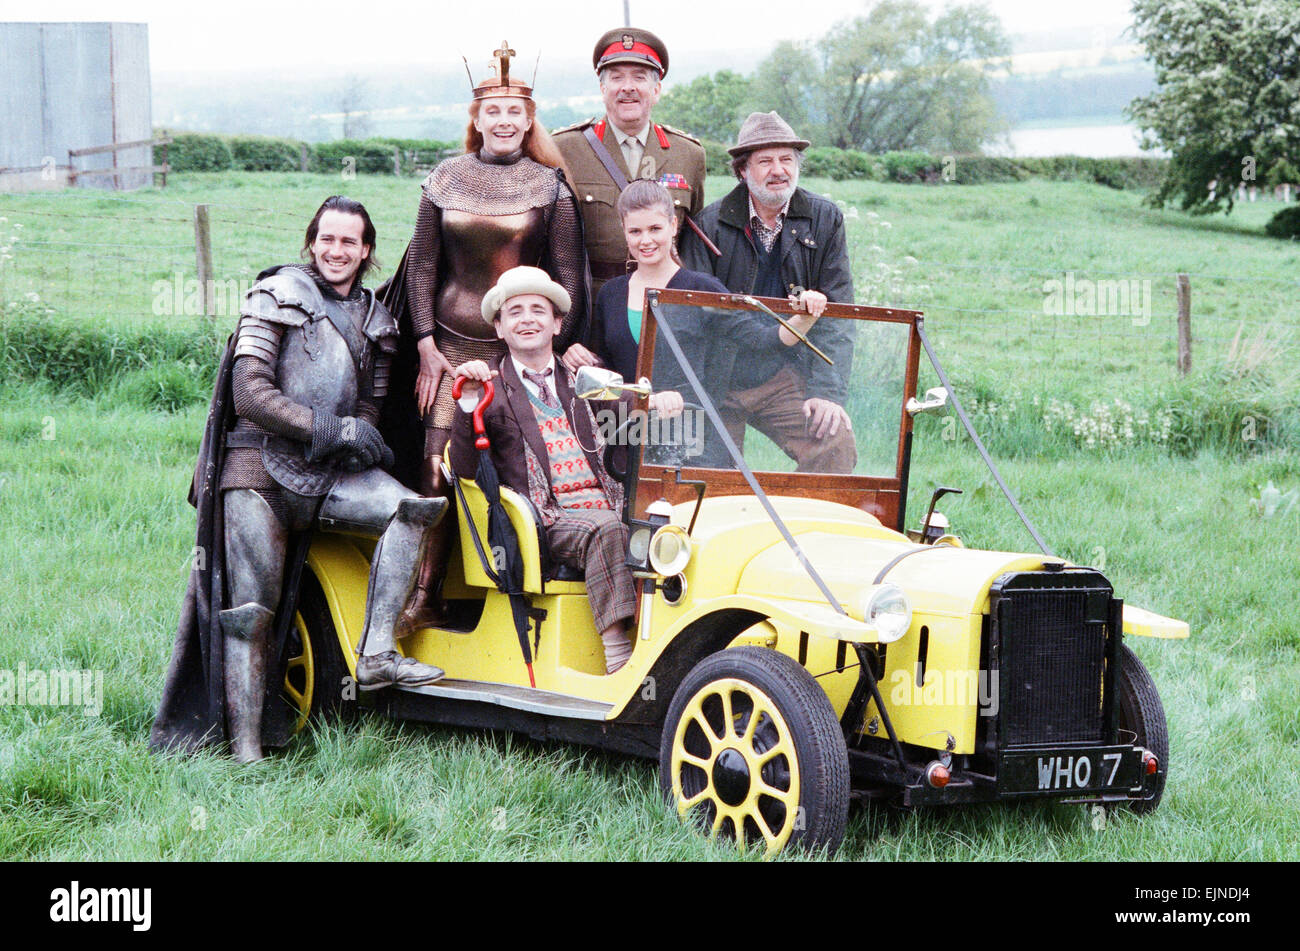 Sylvester McCoy as the Doctor behind the wheel, Christopher Bowen as Mordred (suit of armour) Jean Marsh as Morgaine (wearing crown), Nicholas Courtney as Brigadier Lethbridge Stewart (military uniform) James Ellis as Peter Warmsley (Pork pie hat)and Sophie Aldred as Ace pose with the Doctor's car Bessie whilst on location filming for the Dr Who story Battlefield. 16th May 1989 Stock Photo